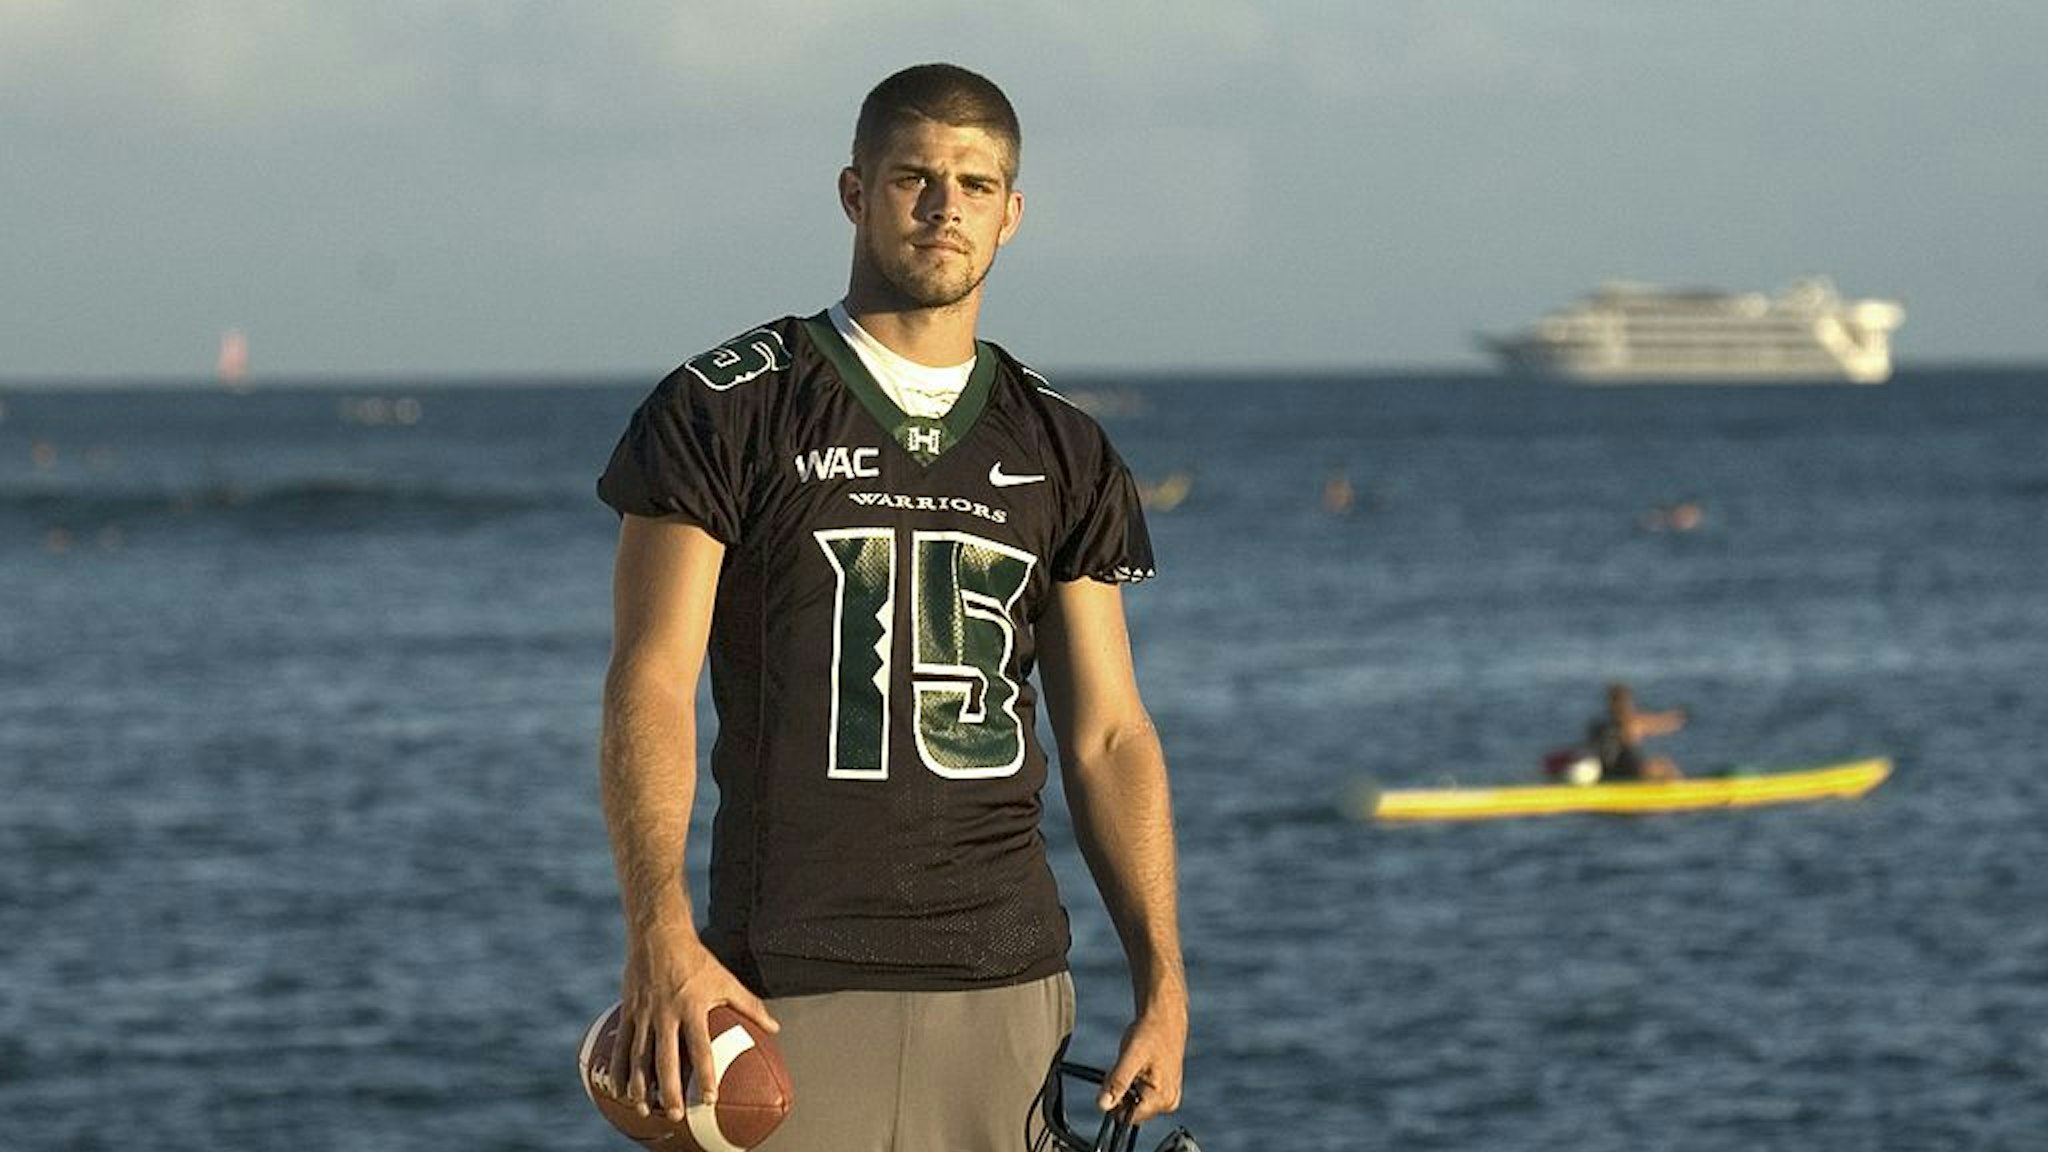 HONOLULU - AUGUST 16: Quarterback Colt Brennan or the University of Hawaii Warriors poses for a photo on Waikiki Beach on August 16, 2007 in Honolulu, Hawaii. (Photo by Lucy Pemoni/Getty Images)